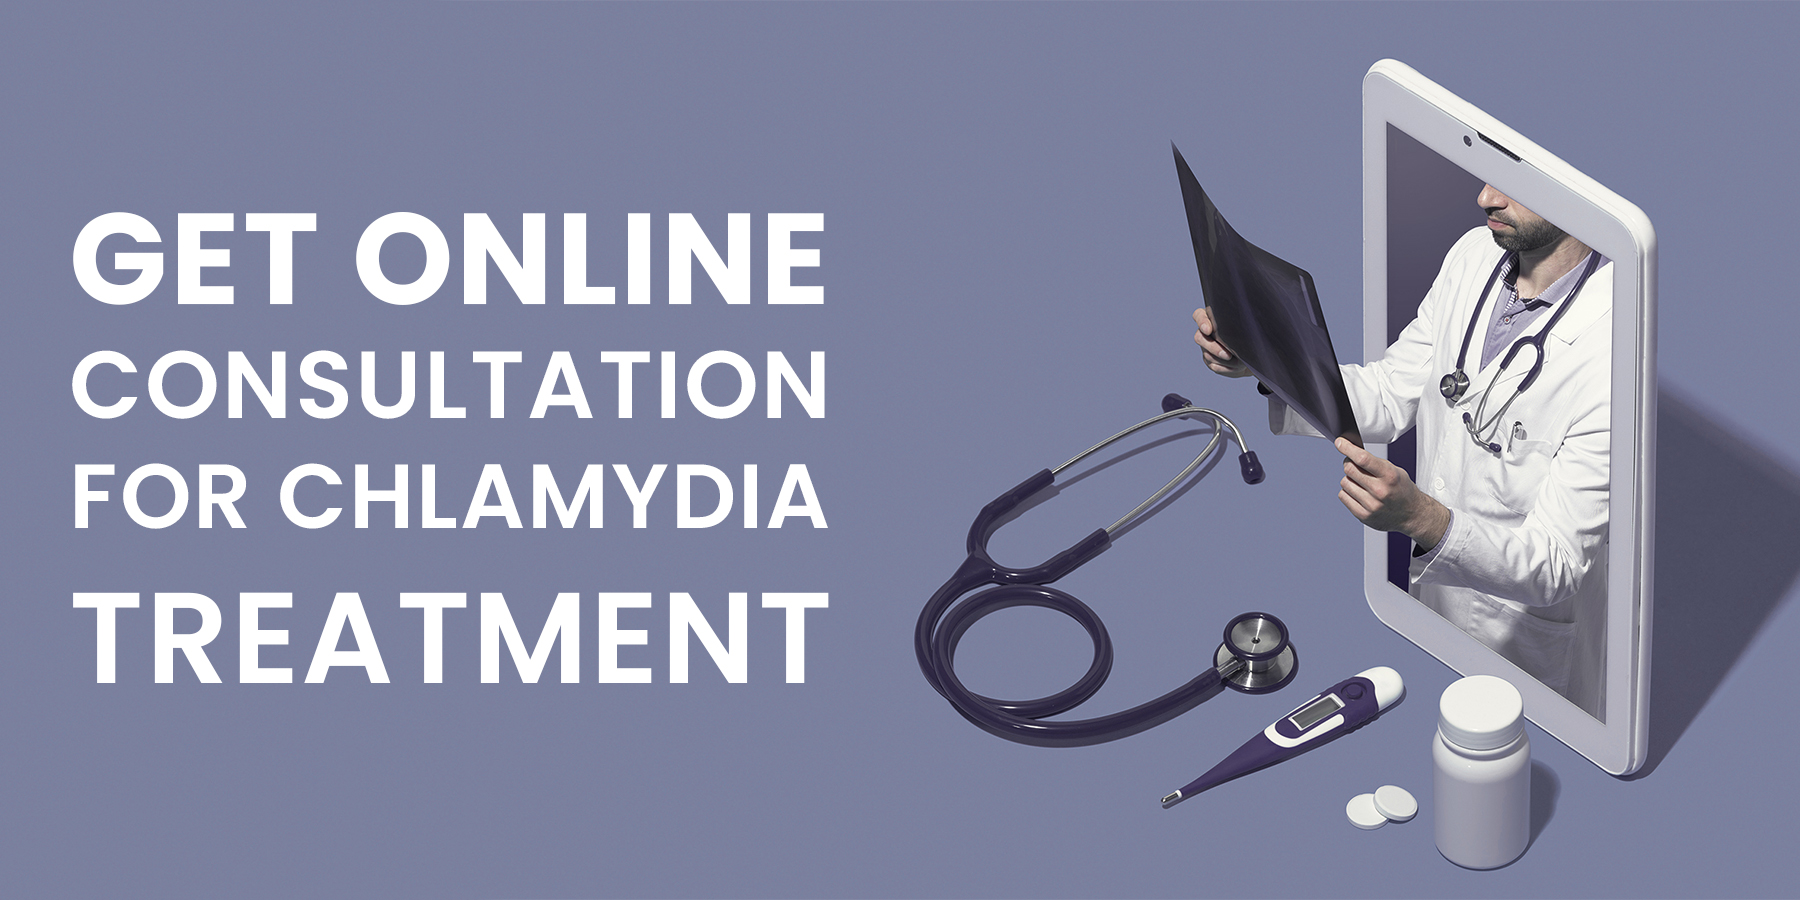 Get Online Consultation for Chlamydia Treatment